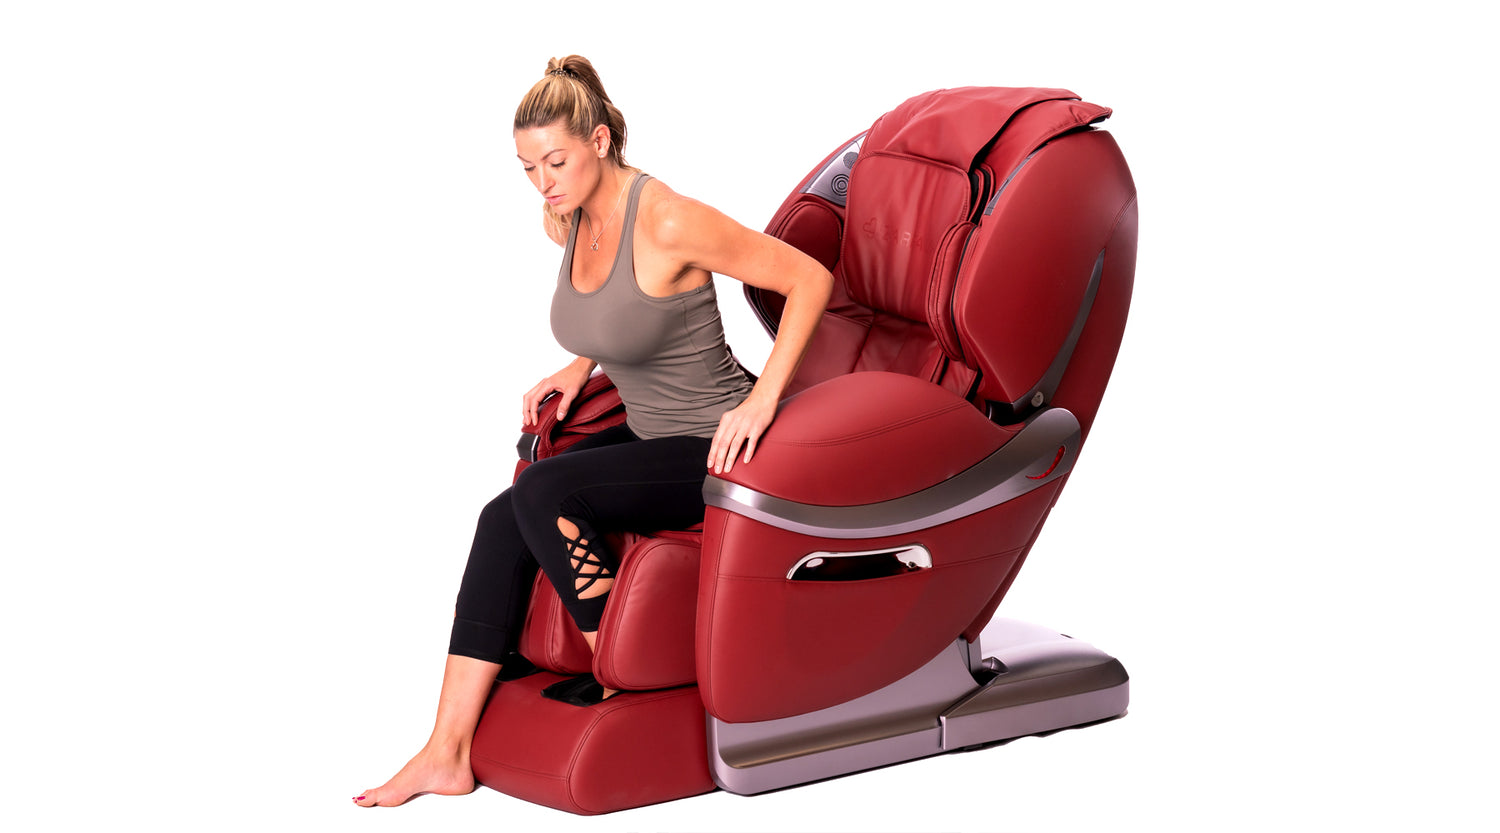 What to Eat and Drink Before and After Using a Massage Chair